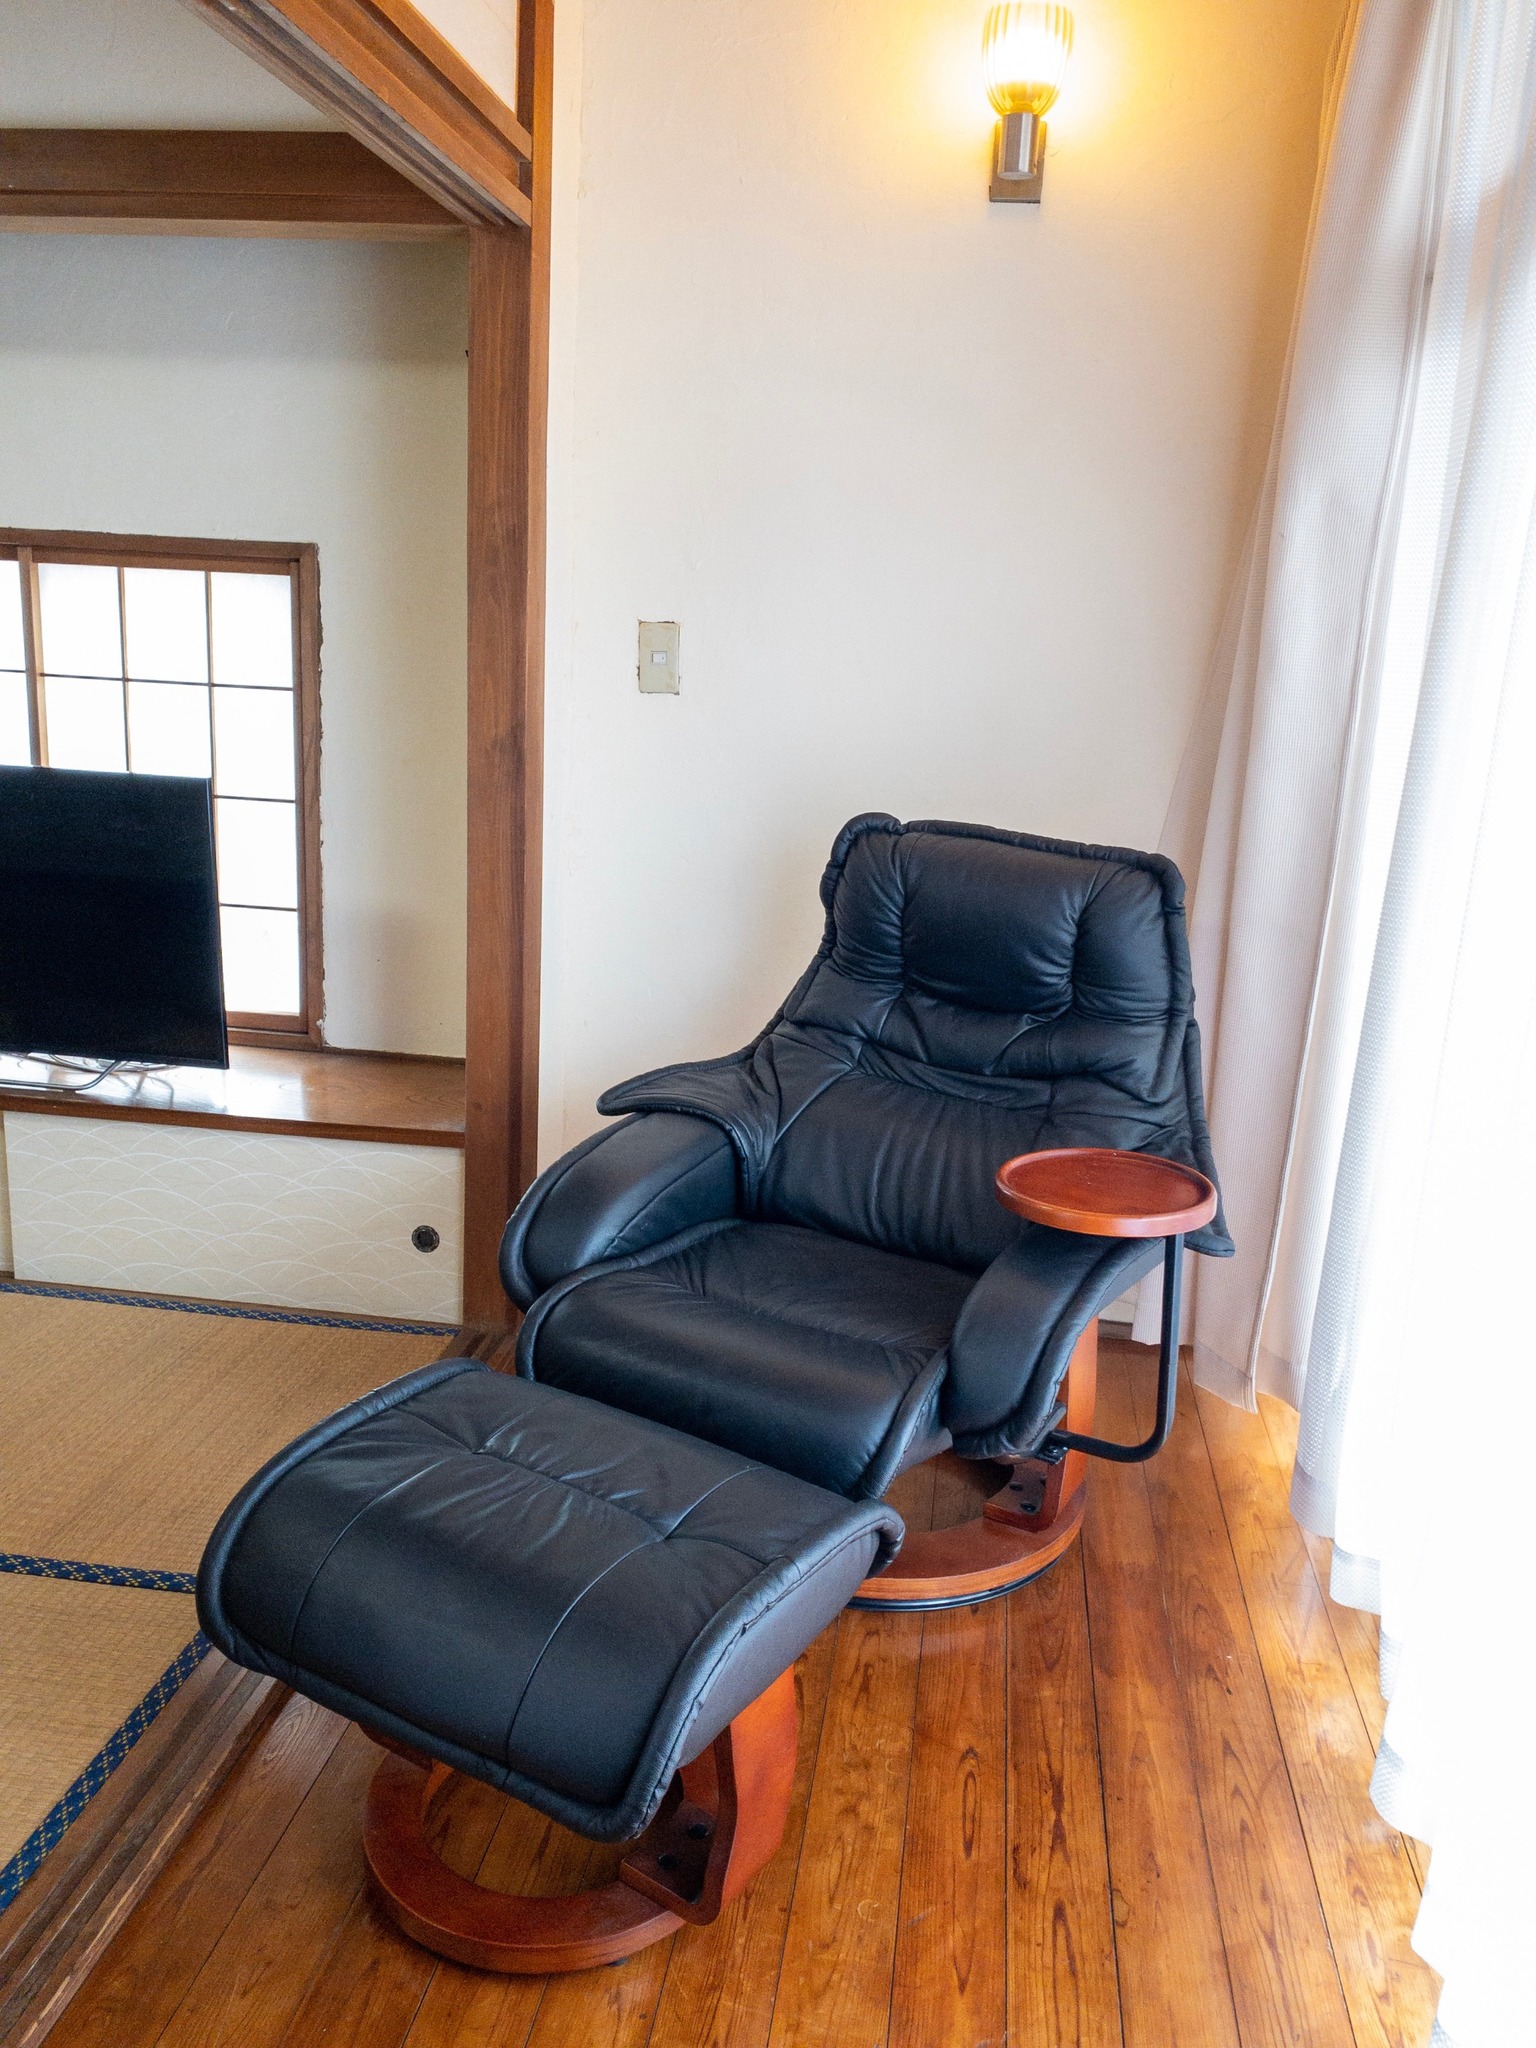 ”Engawa” with two reclining chairs facing the balcony.